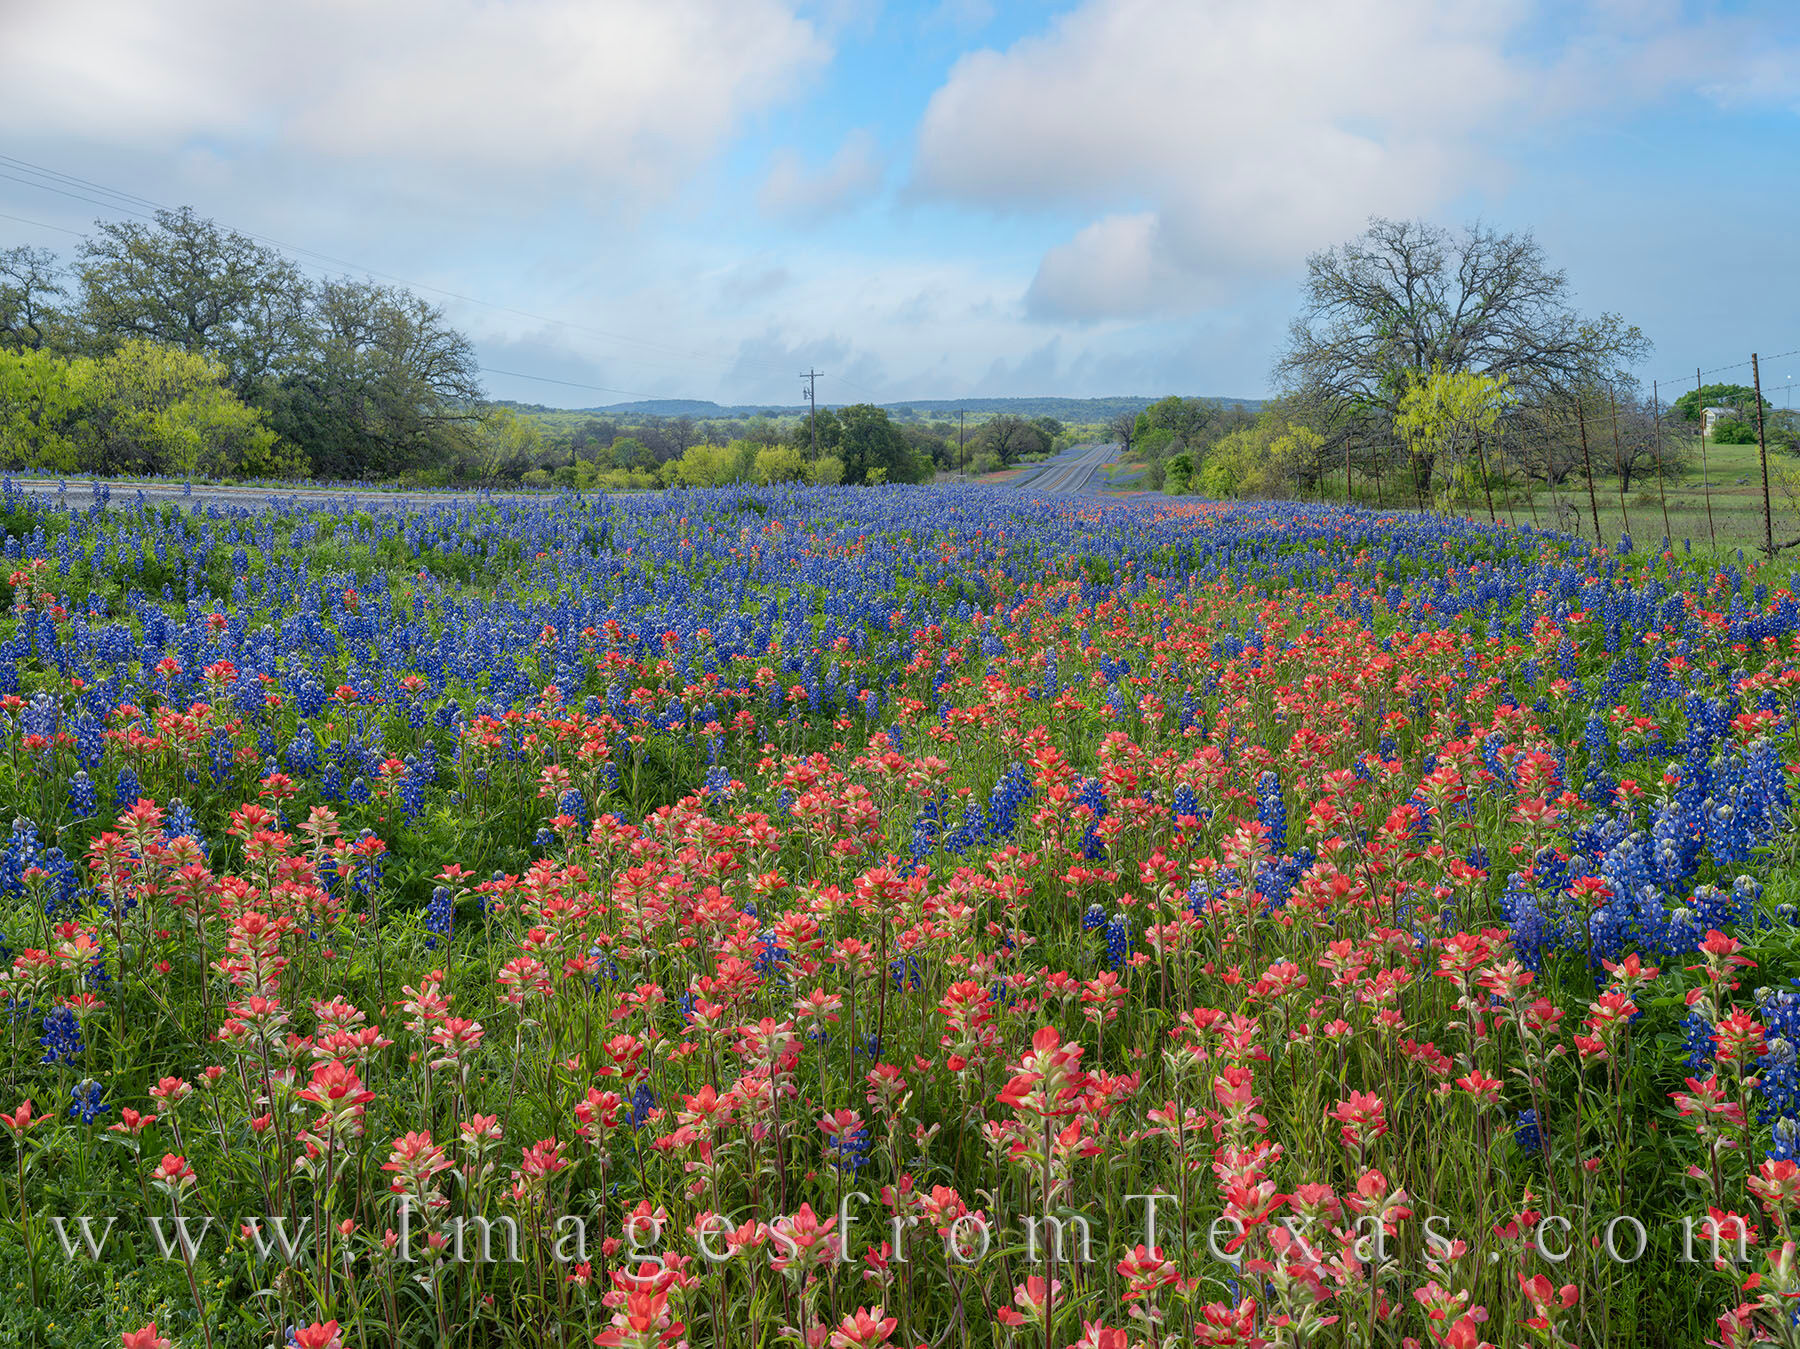 This spring morning found me in the Hill Country's northern parts. The bluebonnets and Indian paintbrush were vibrant under billowy...